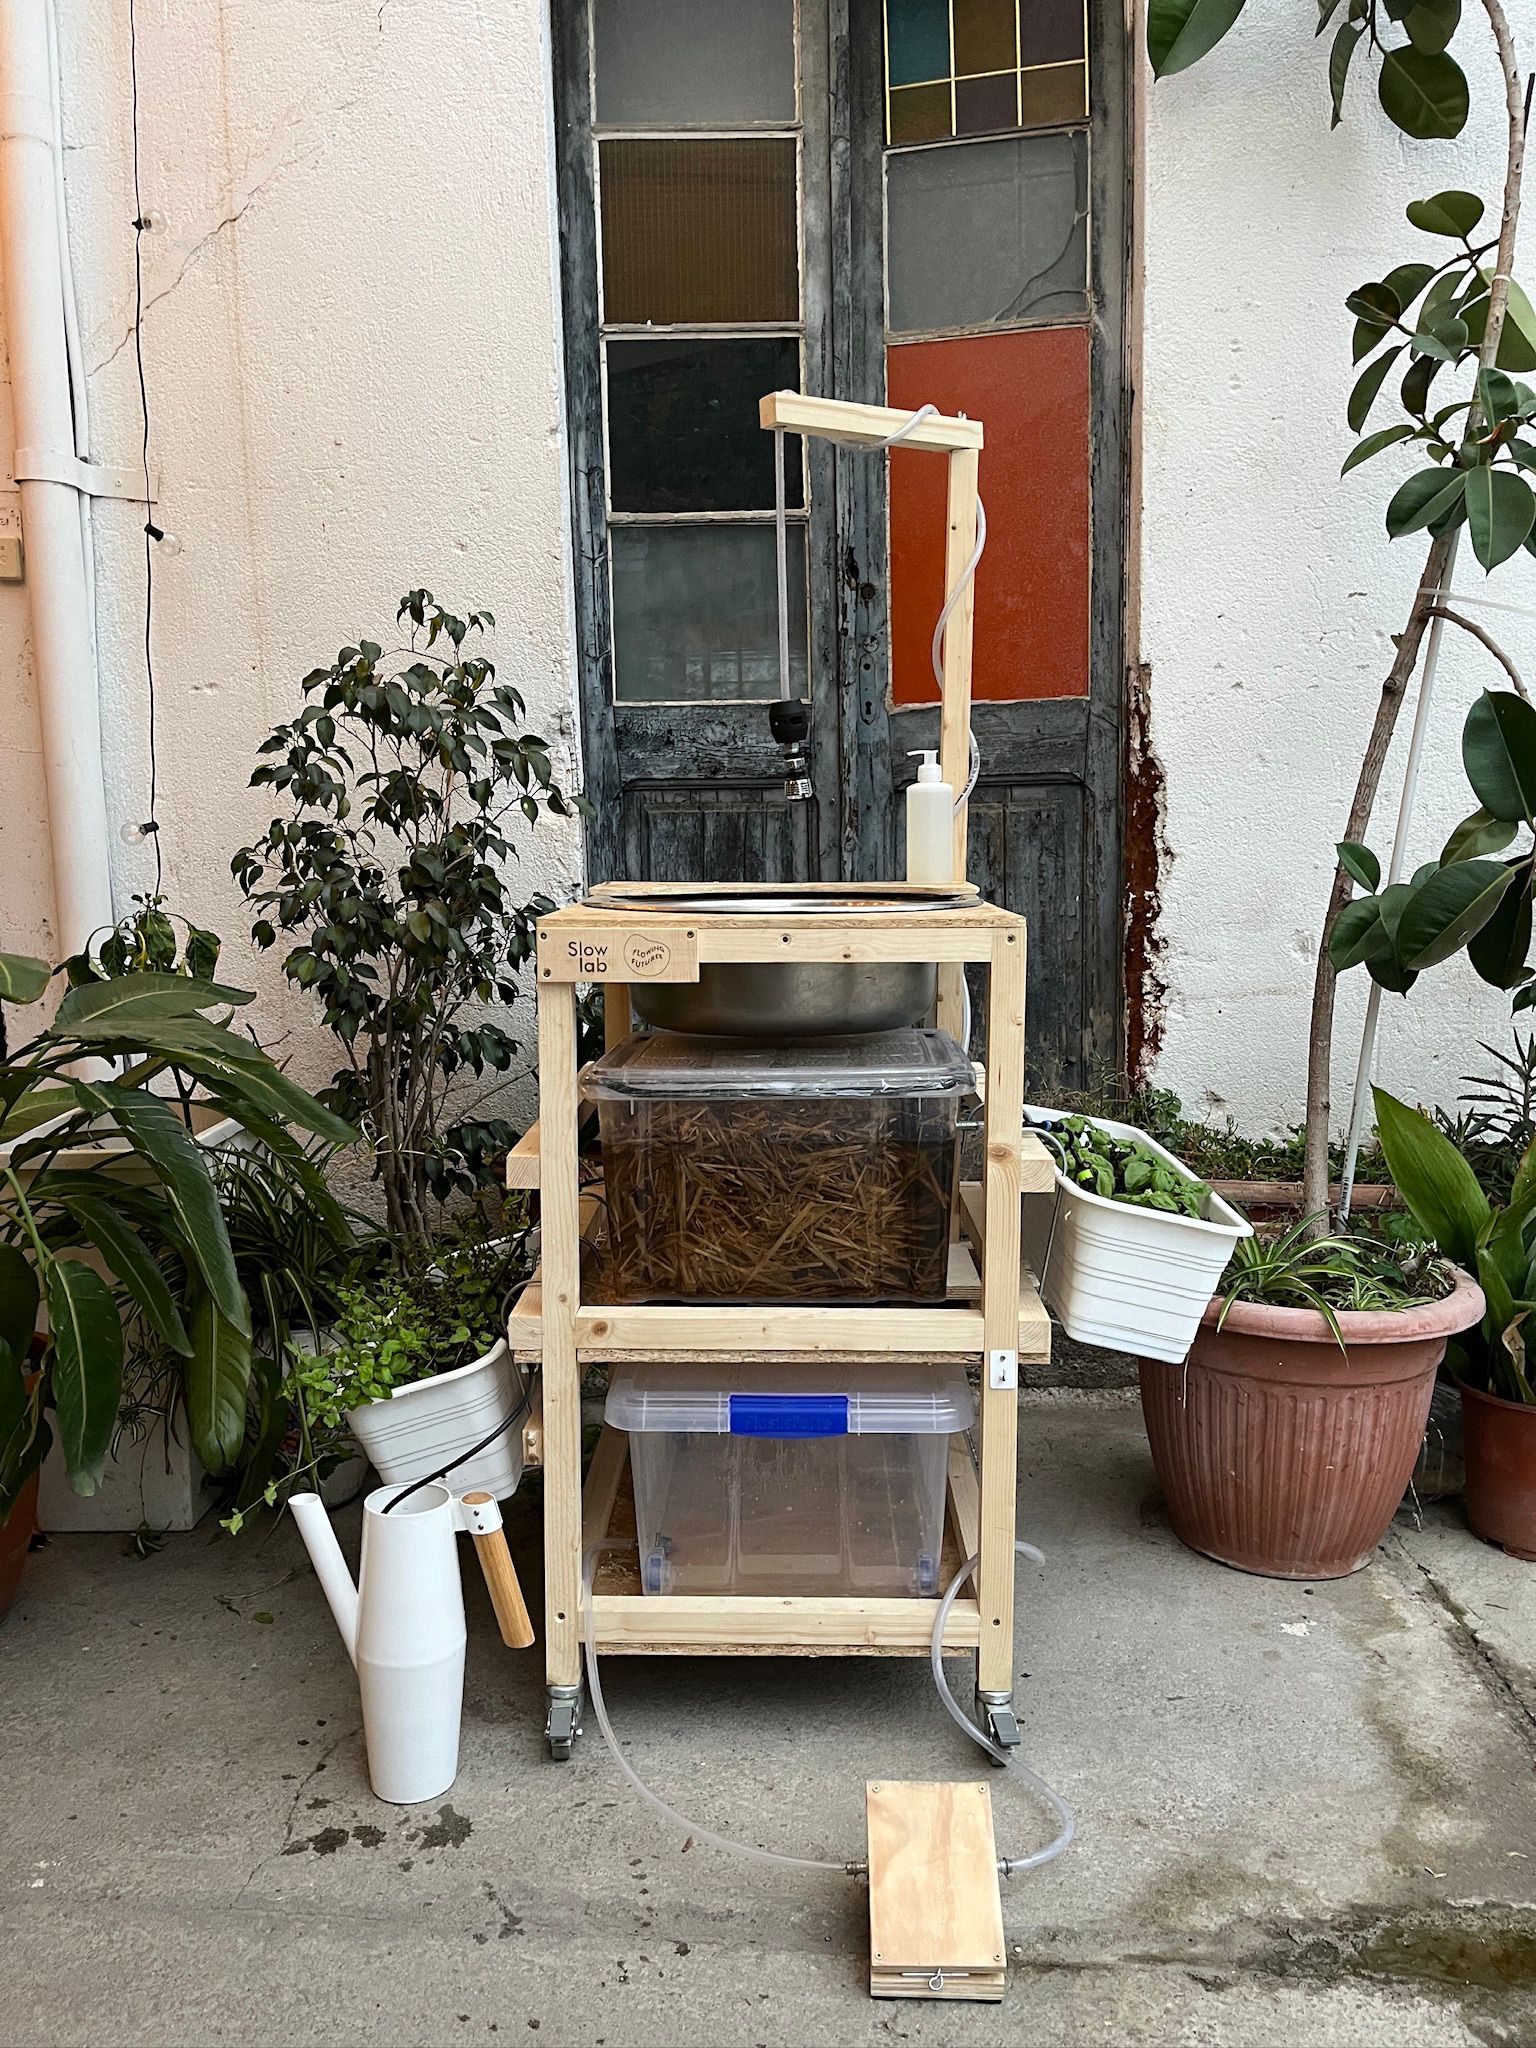 Greywater filtration